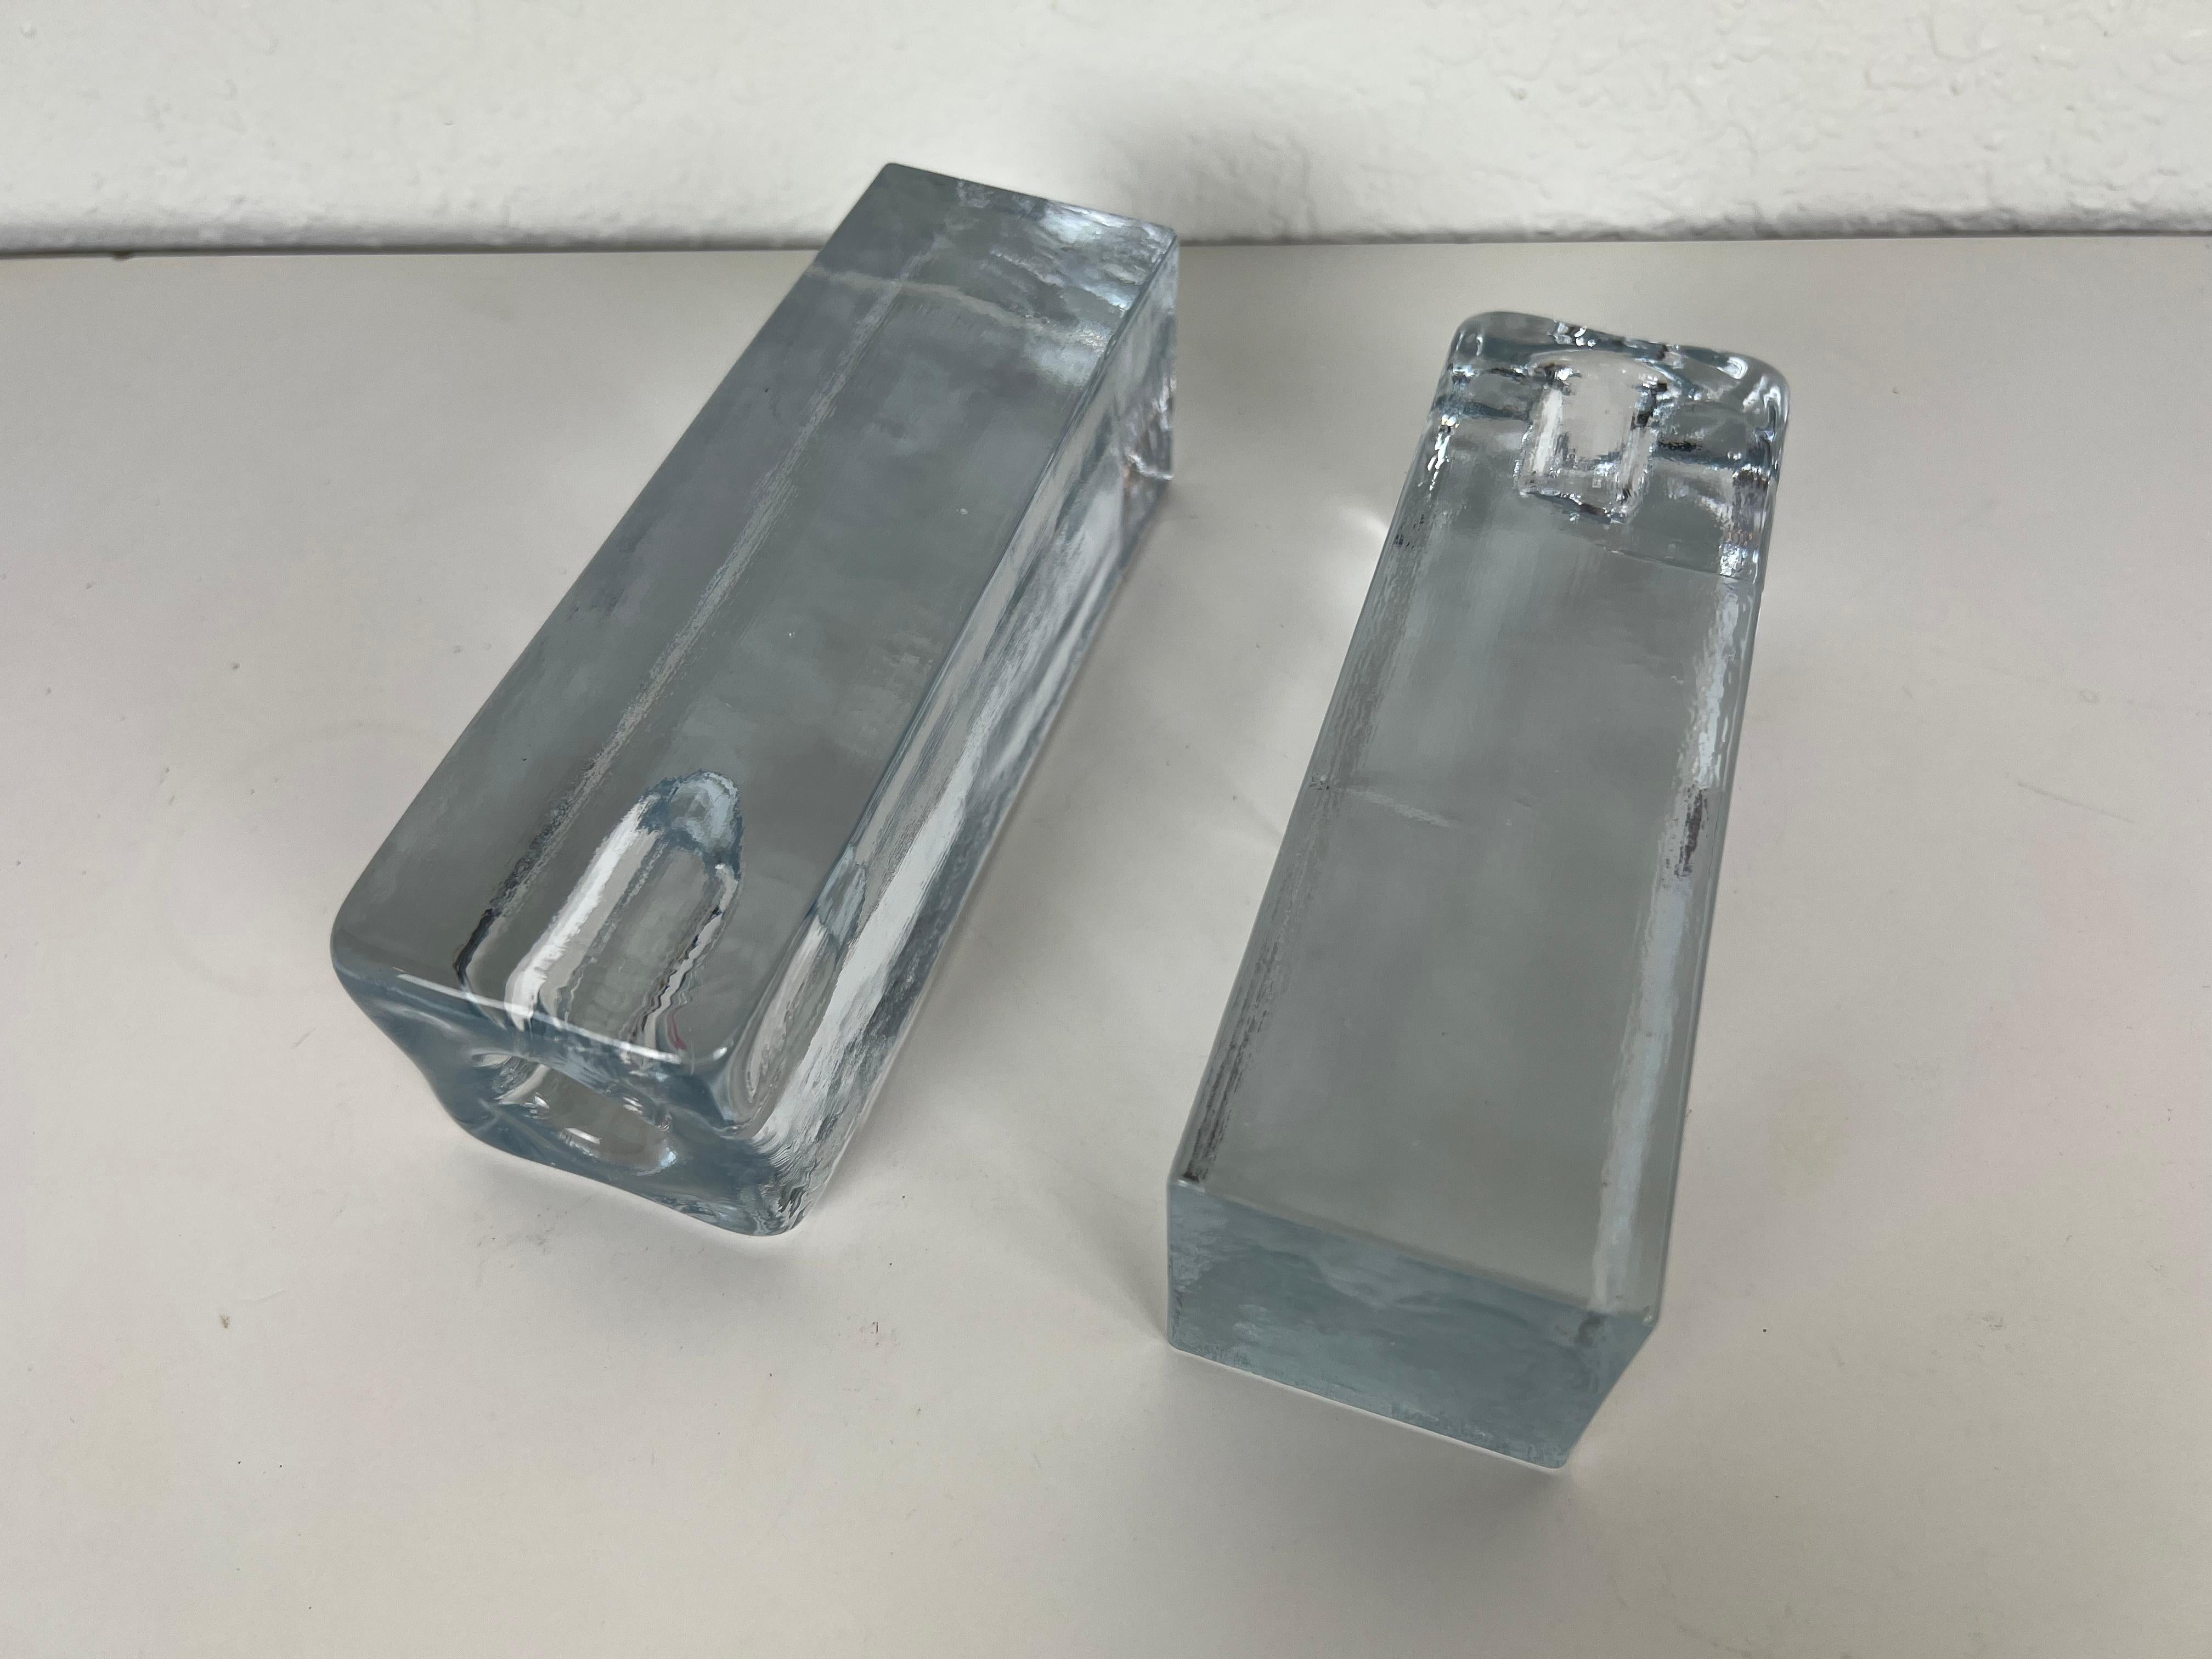 Blenko Ice Cube Pillar Candleholders, a Pair In Excellent Condition For Sale In Fort Lauderdale, FL